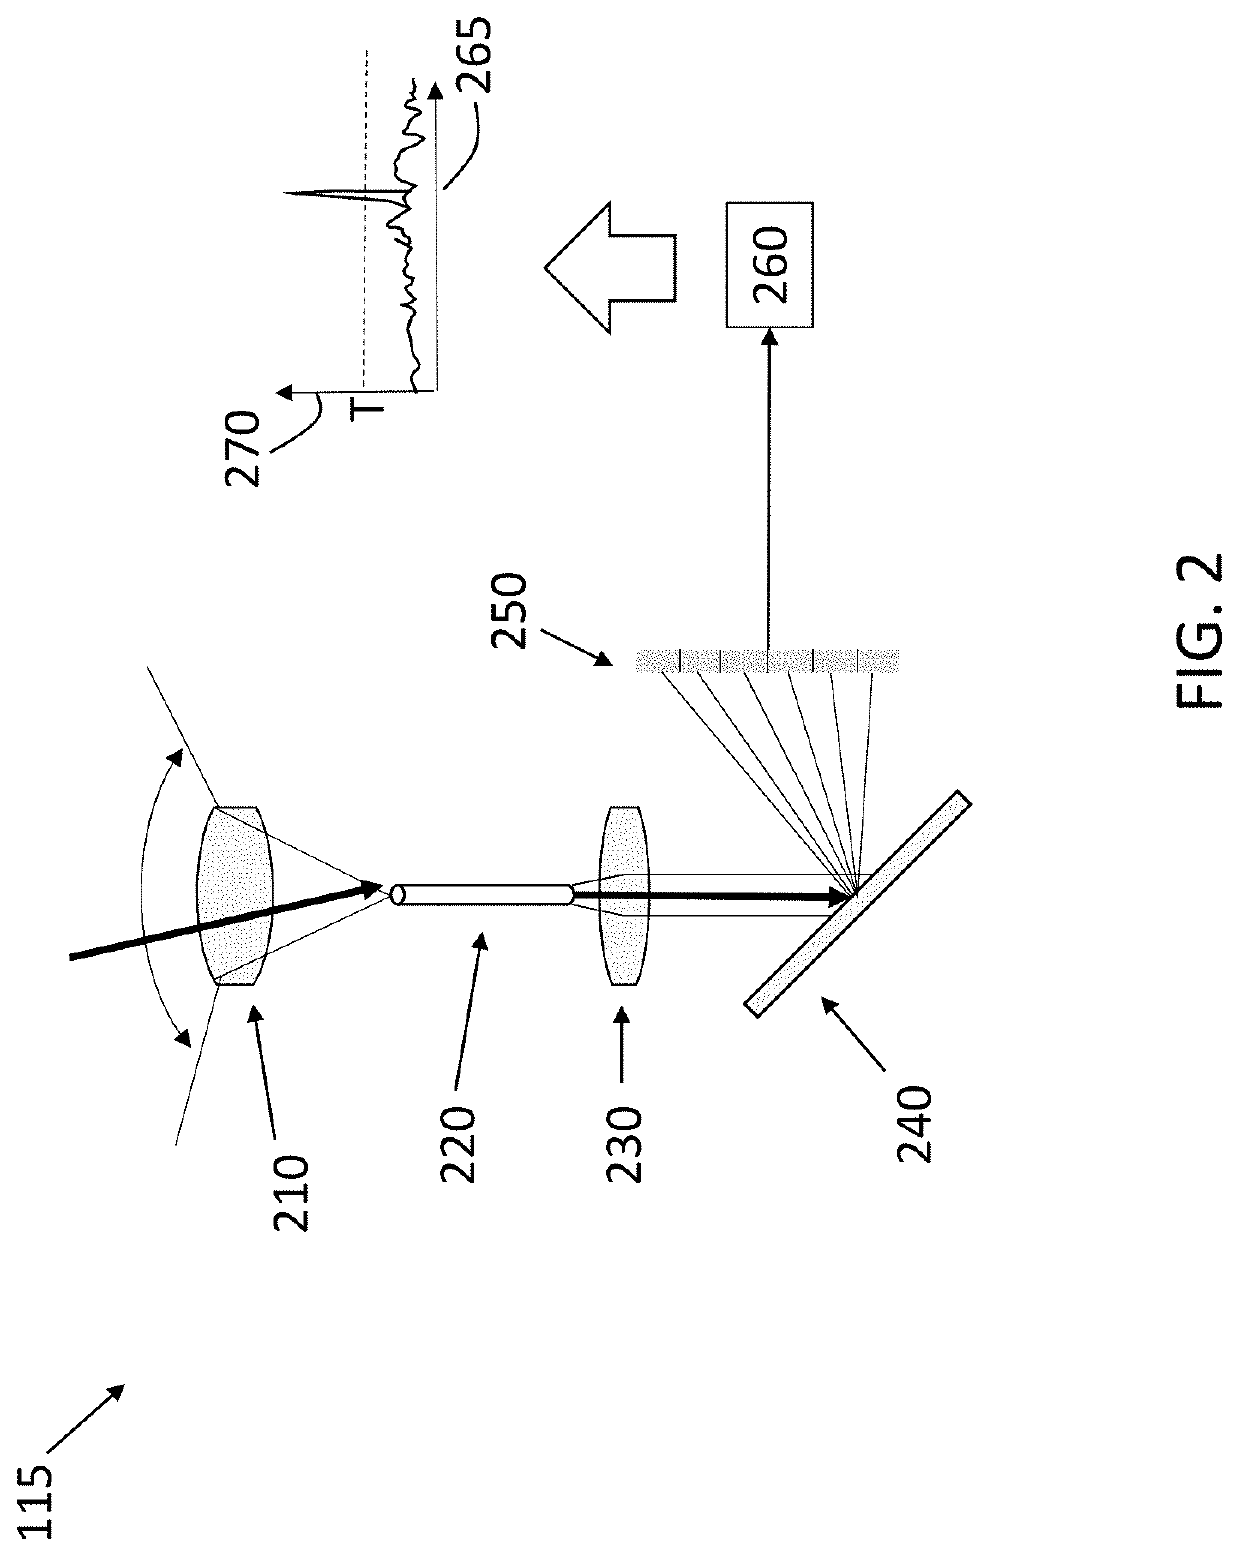 Mitigation of errant signal effects on an image sensor of a vehicle